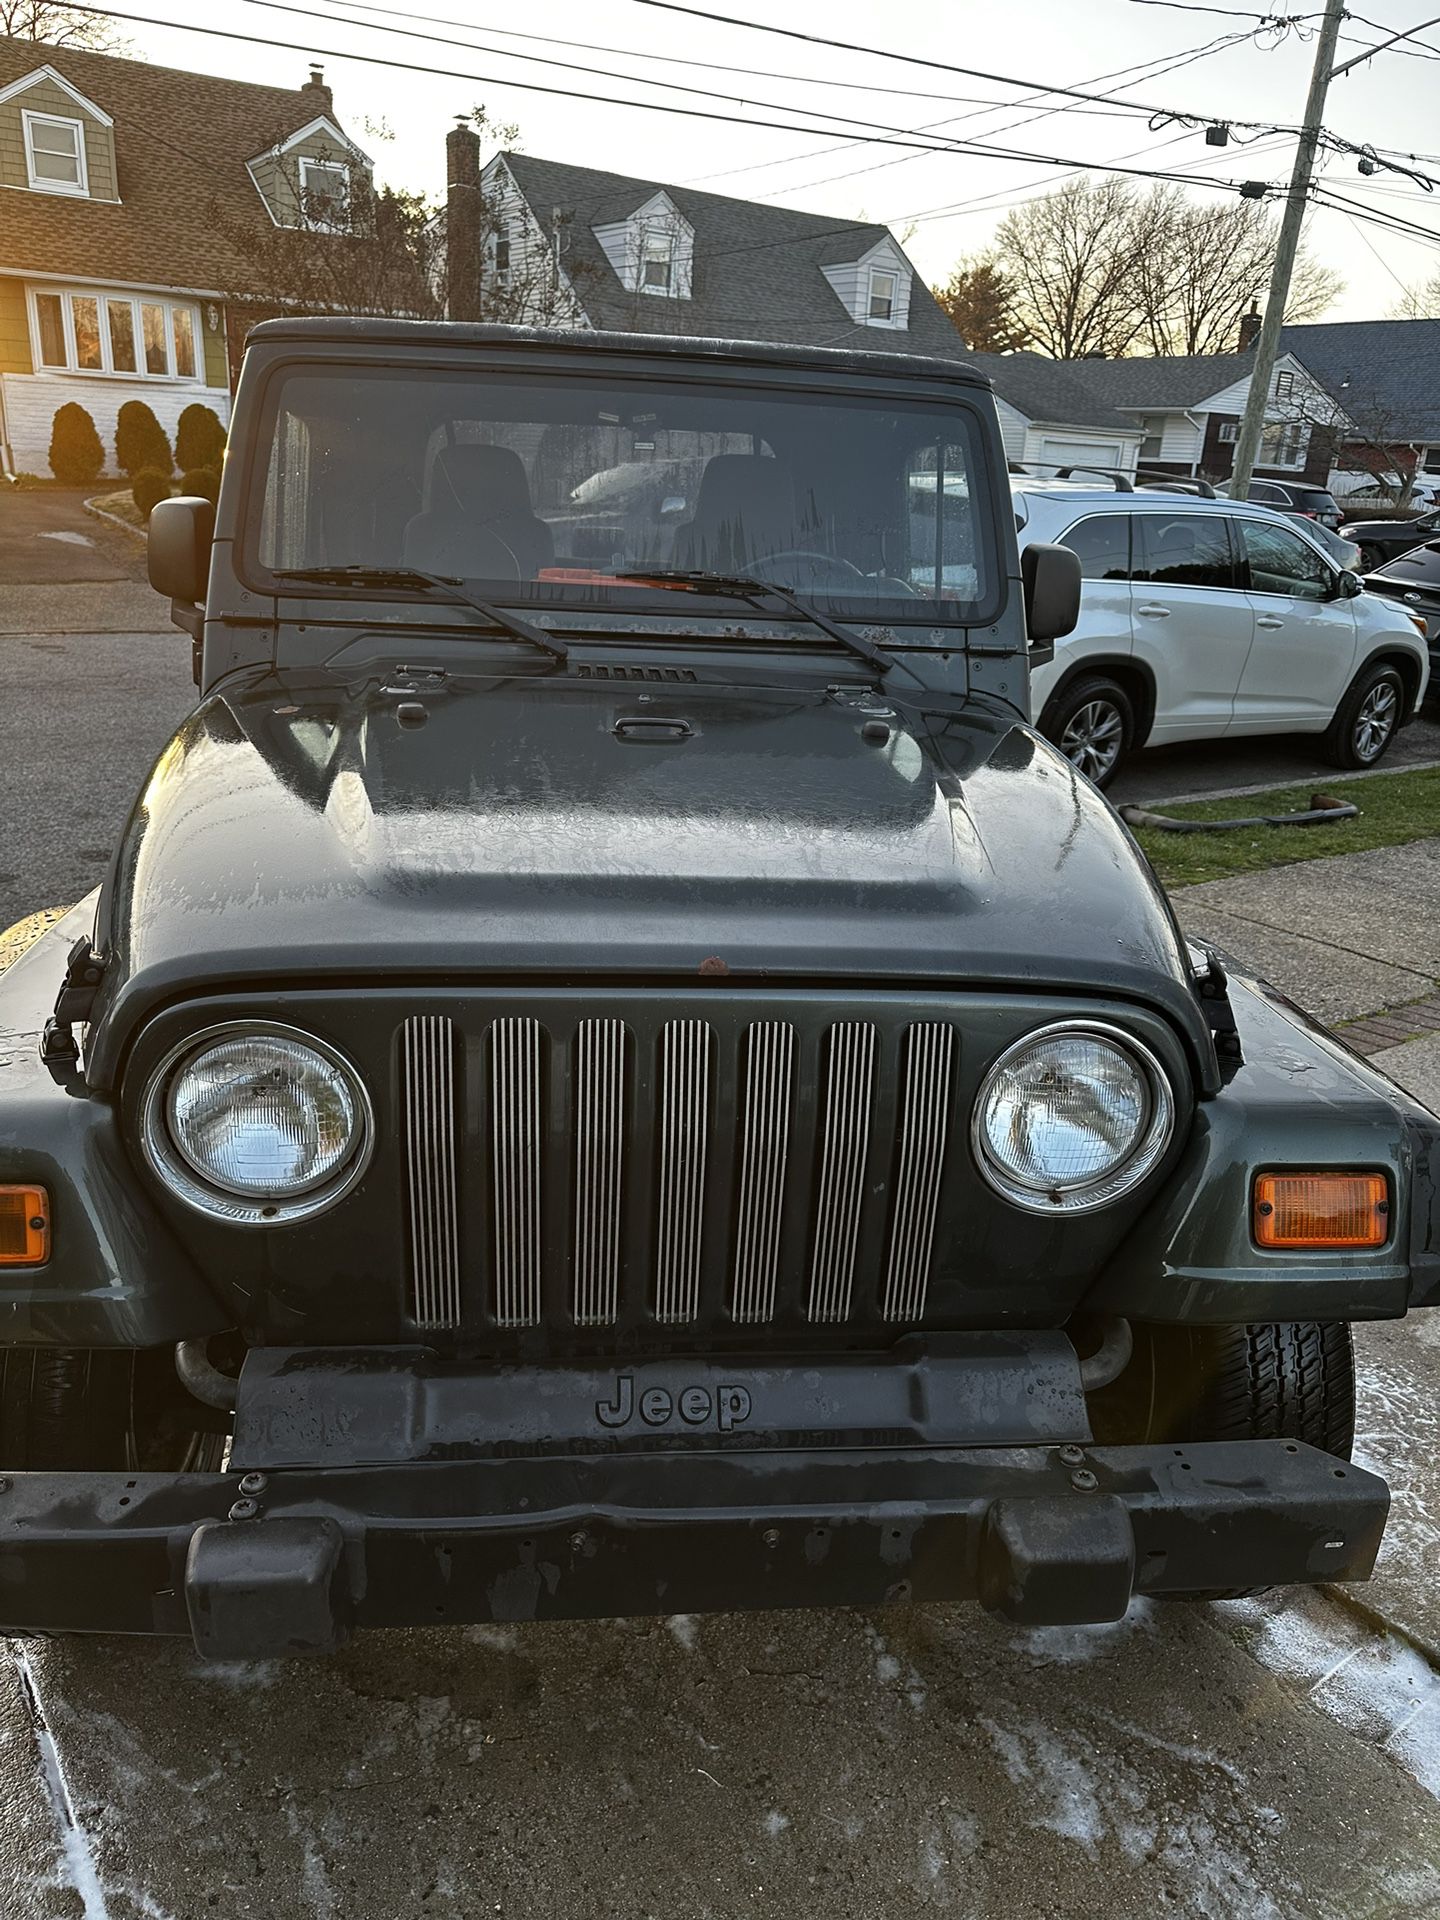 2003 Jeep Wrangler for Sale in Wantagh, NY - OfferUp